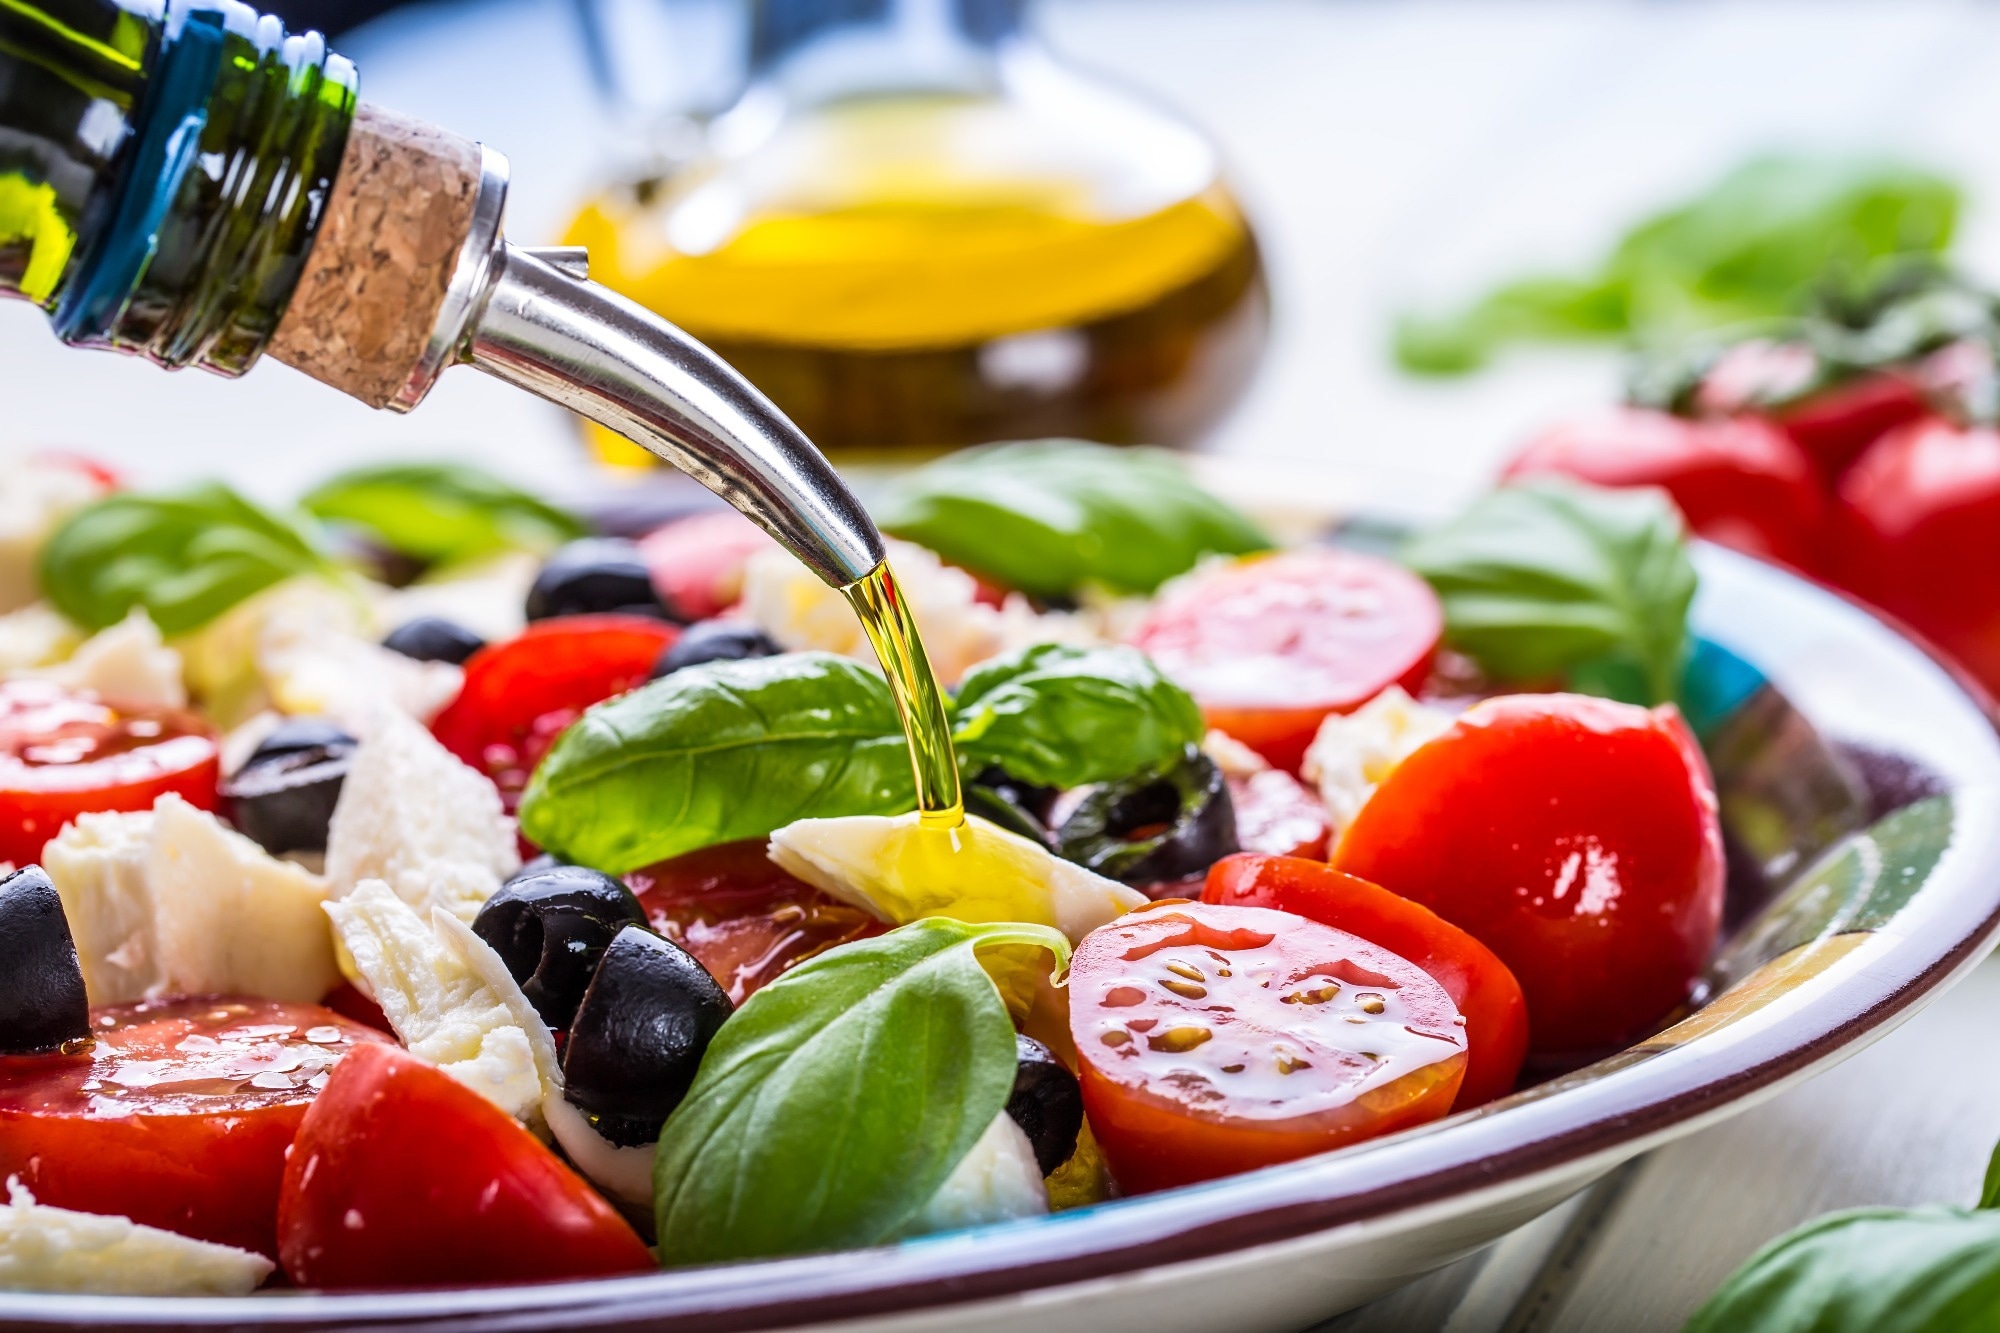 Study: Mediterranean diet adherence is associated with lower dementia risk, independent of genetic predisposition: findings from the UK Biobank prospective cohort study. Image Credit: Marian Weyo / Shutterstock